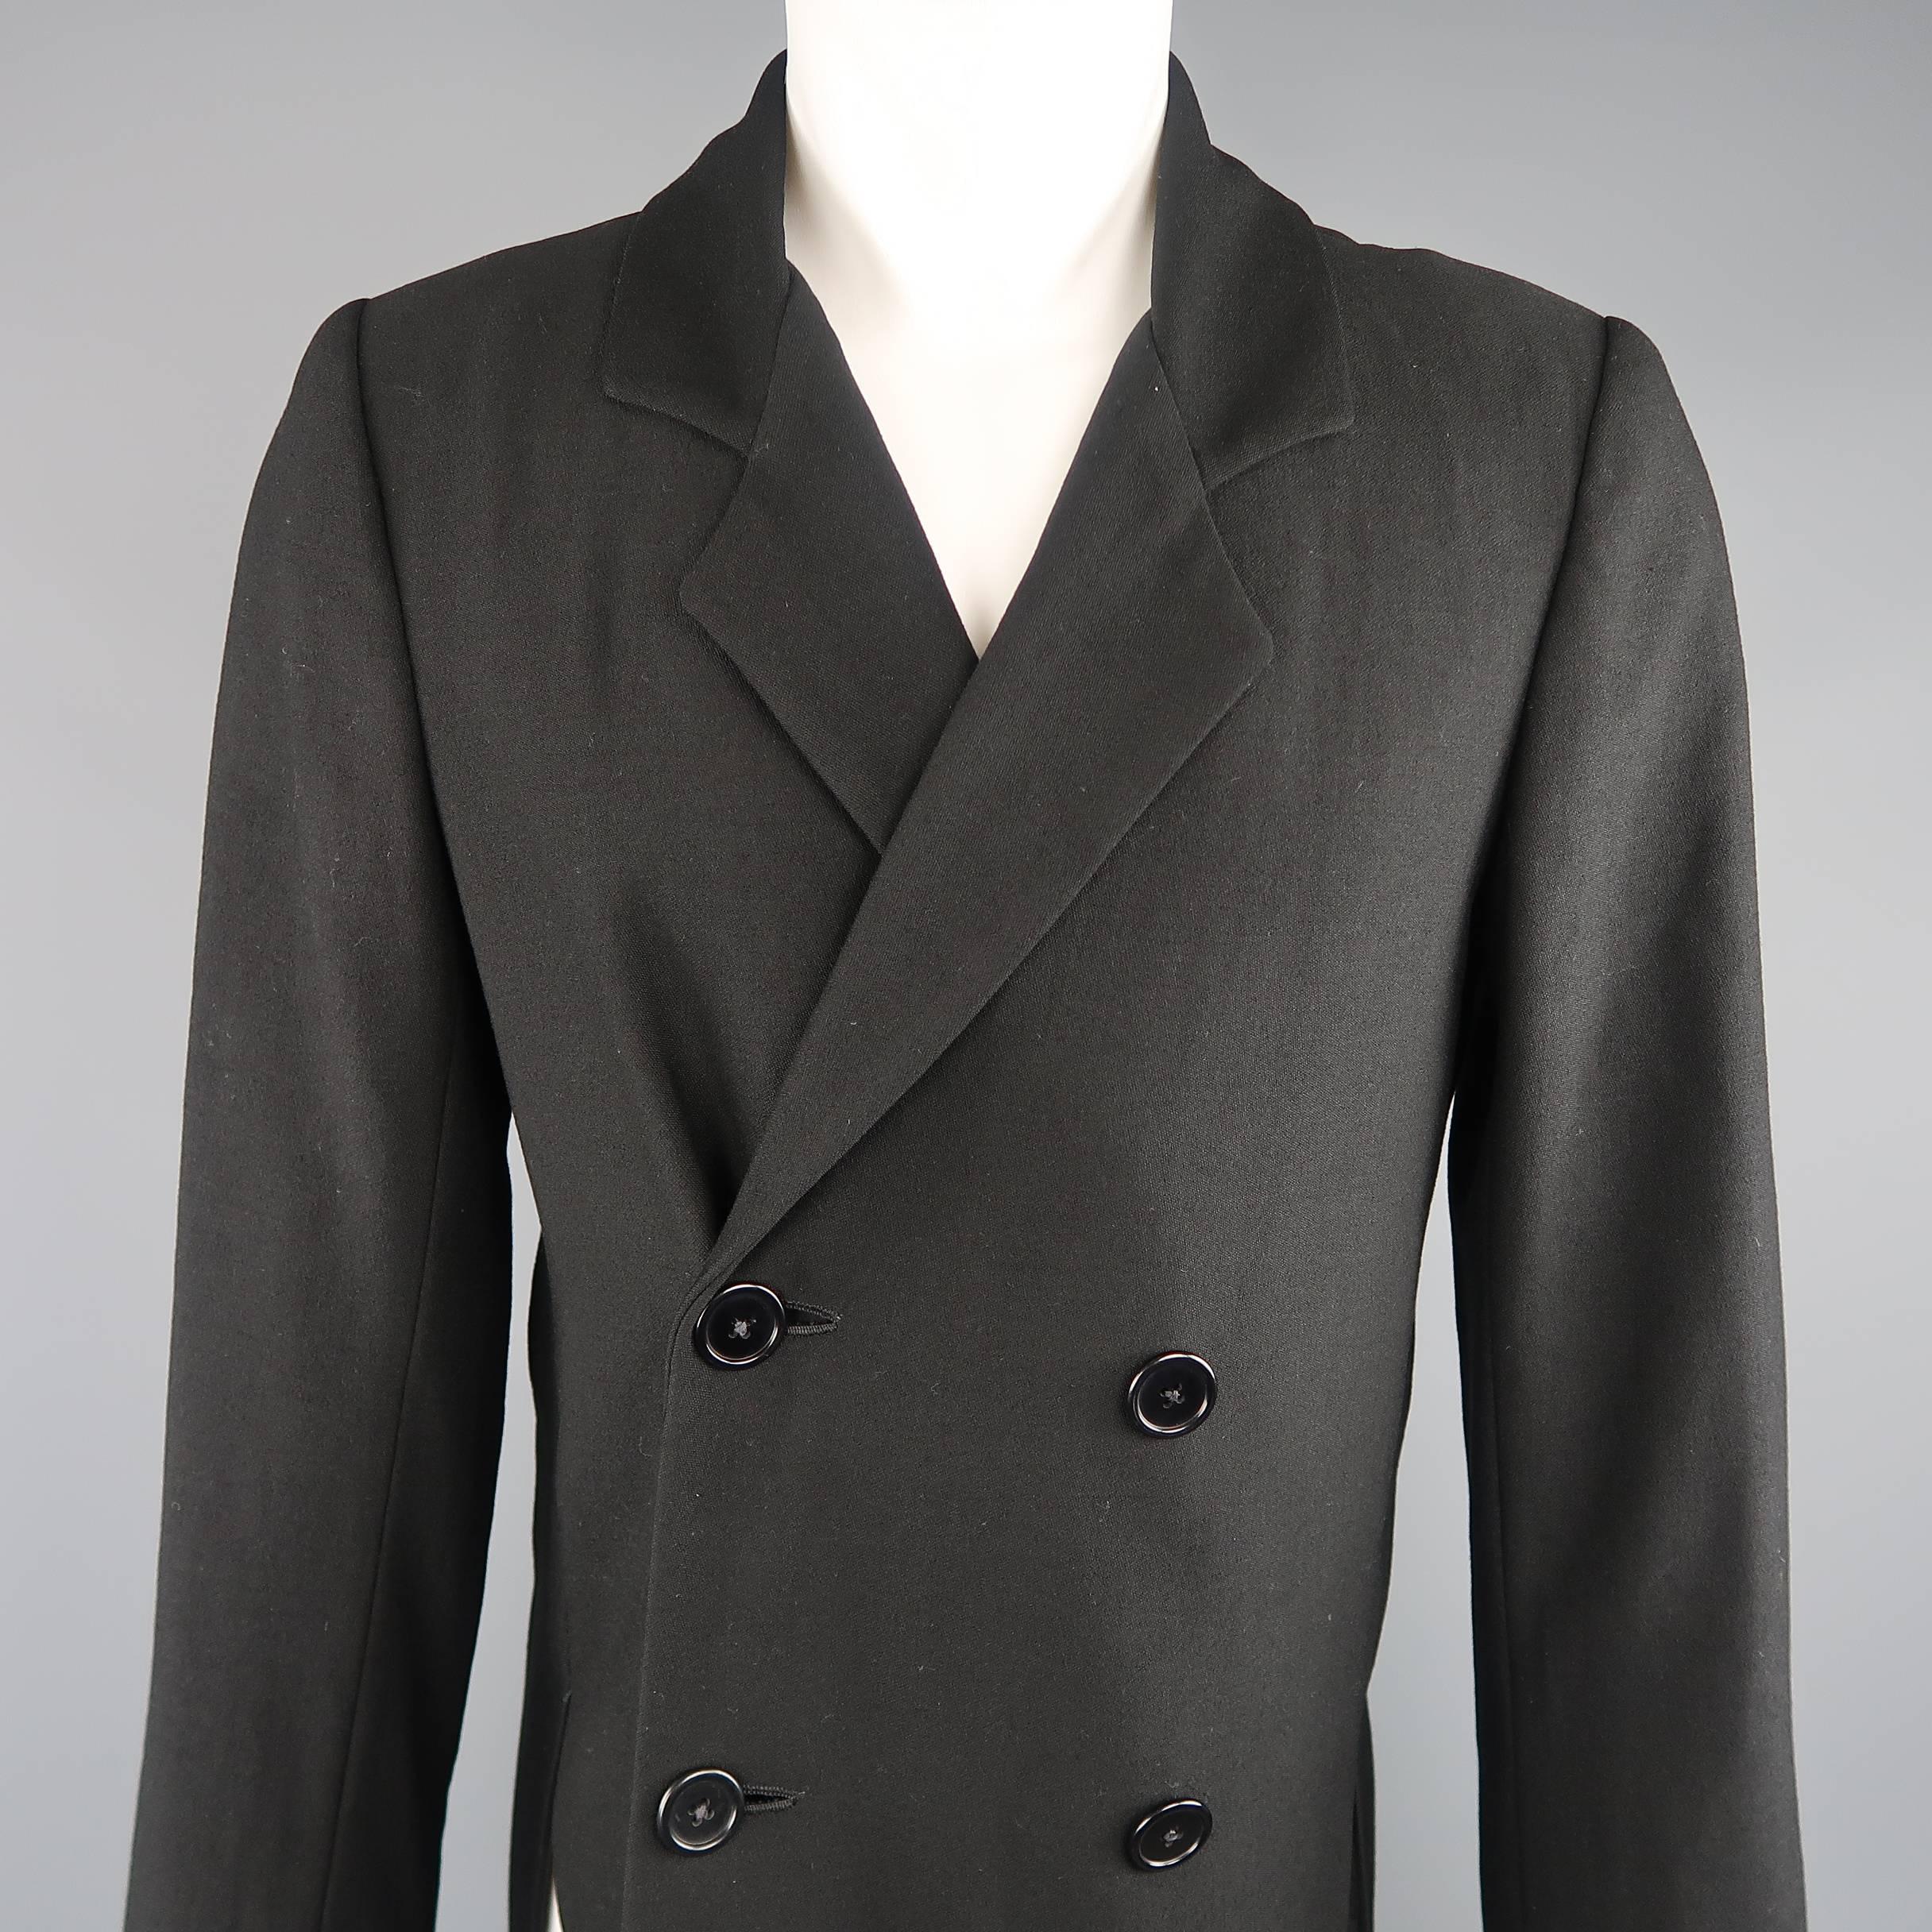 MAISON MARTIN MARGIELA Line 14 slim fit, double breasted coat comes in wool canvas with a notch lapel, vented back, and double slit front. Made in Italy.
 
Excellent Pre-Owned Condition.
Marked: IT 50
 
Measurements:
 
Shoulder: 17 in.
Chest: 42